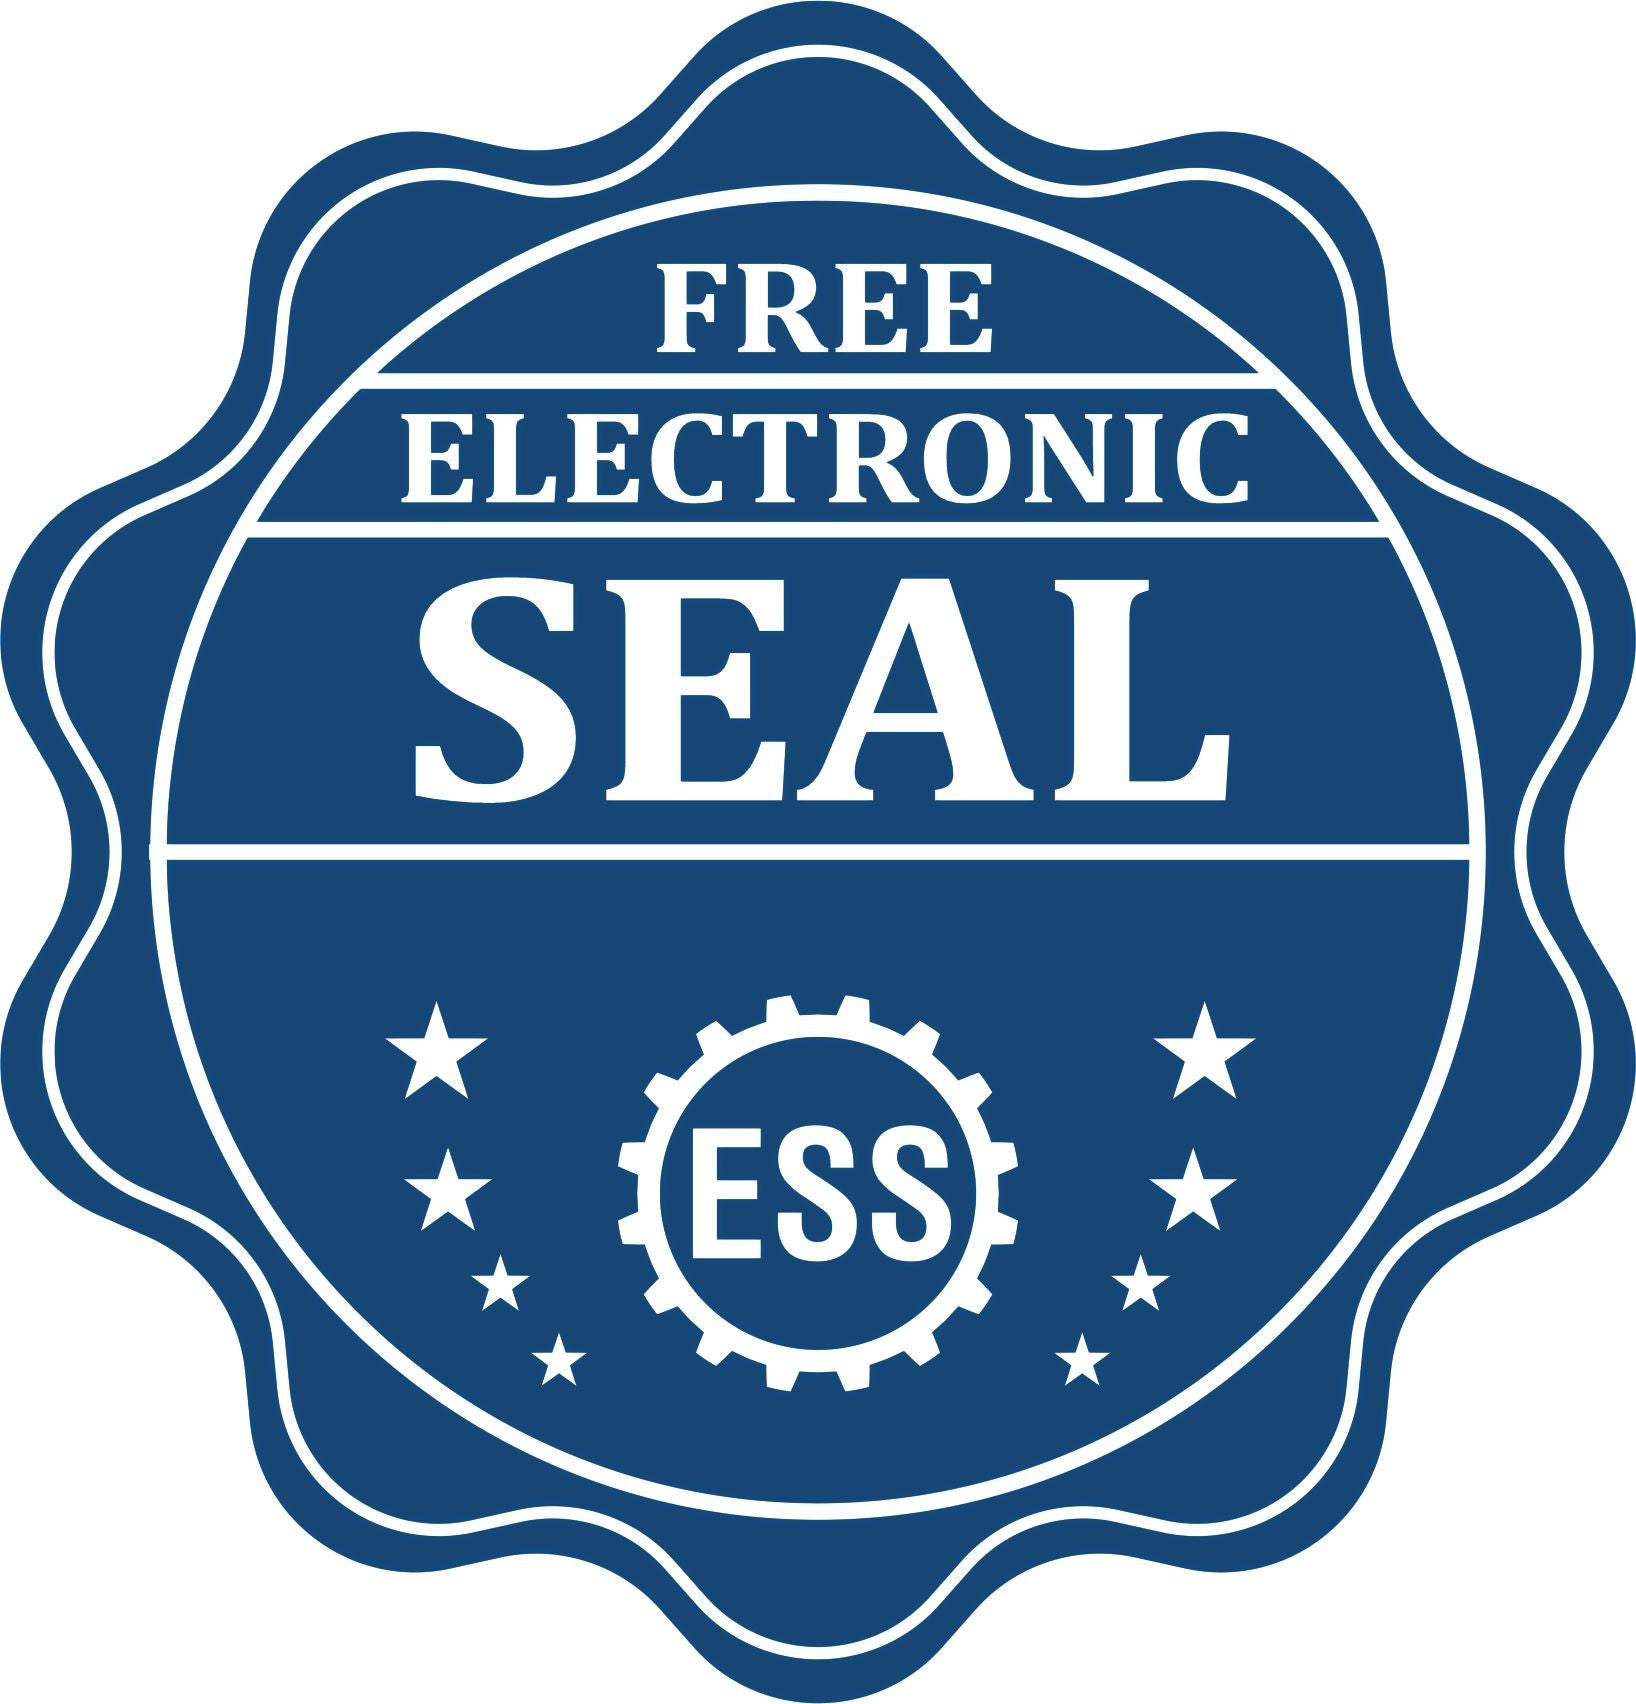 A badge showing a free electronic seal for the Heavy Duty Cast Iron Oklahoma Architect Embosser with stars and the ESS gear on the emblem.